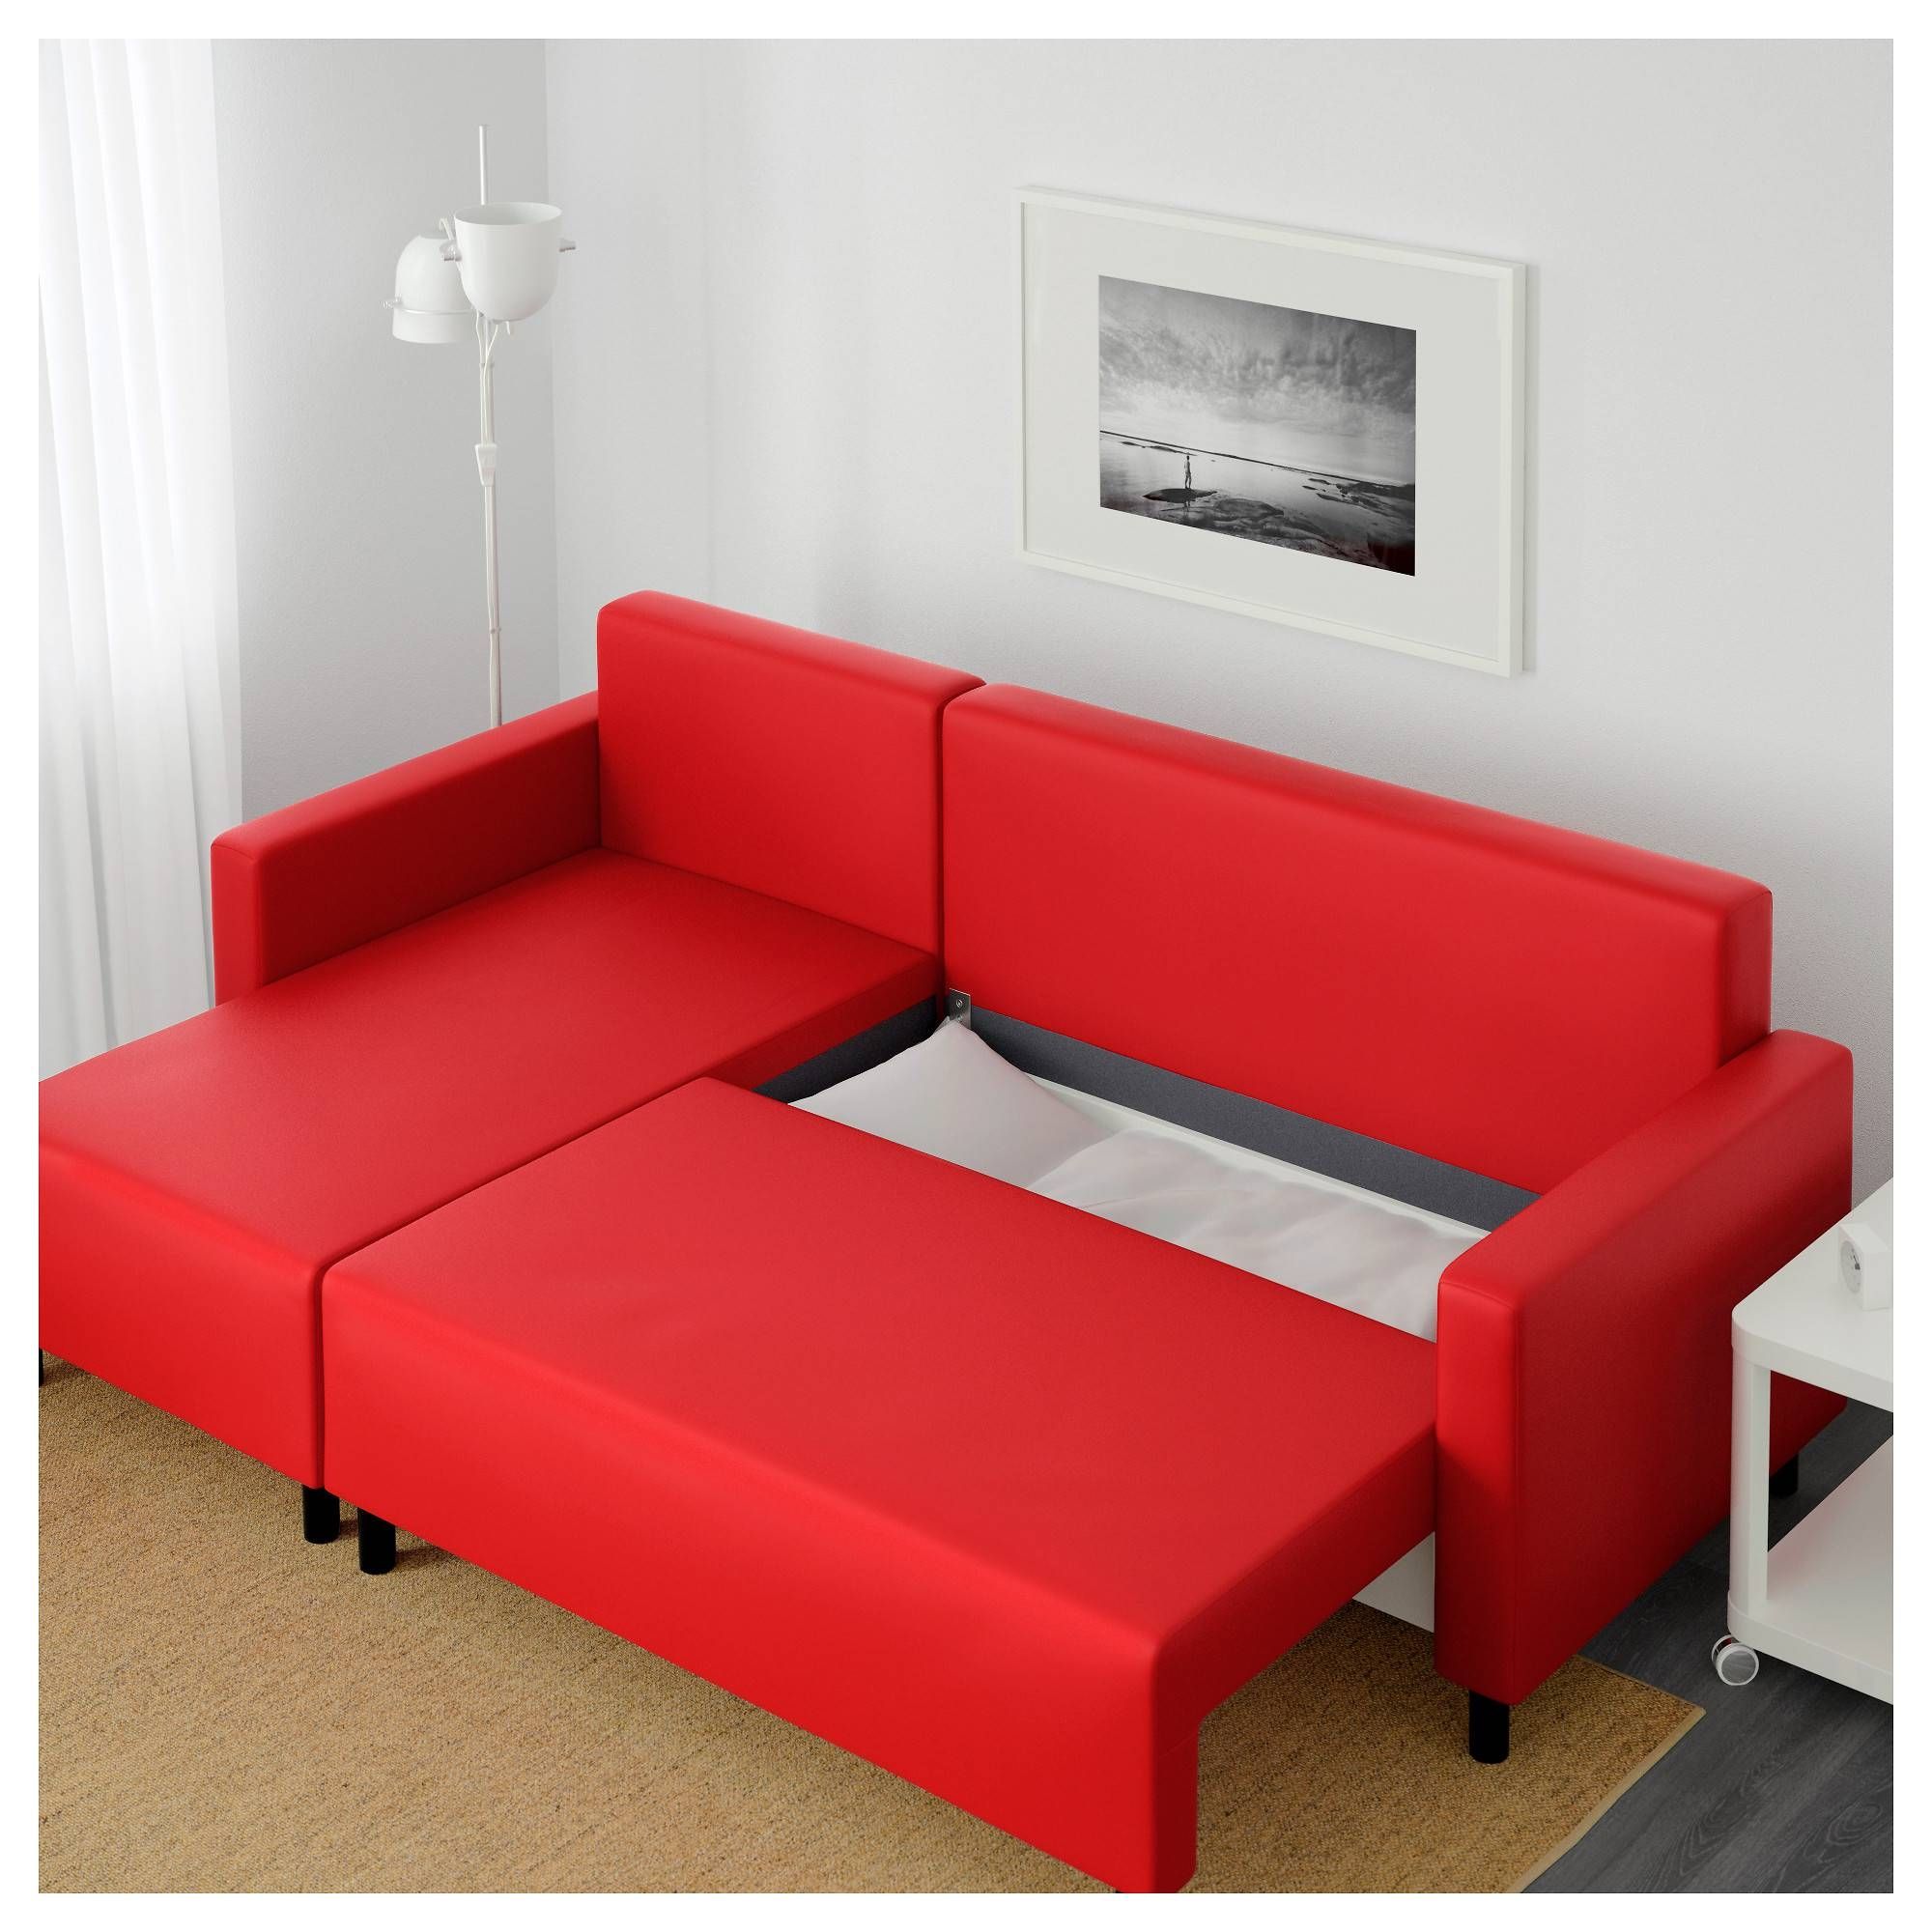 Lugnvik Sofa Bed With Chaise Longue Tallåsen Red – Ikea Inside Red Sofa Beds Ikea (View 13 of 30)